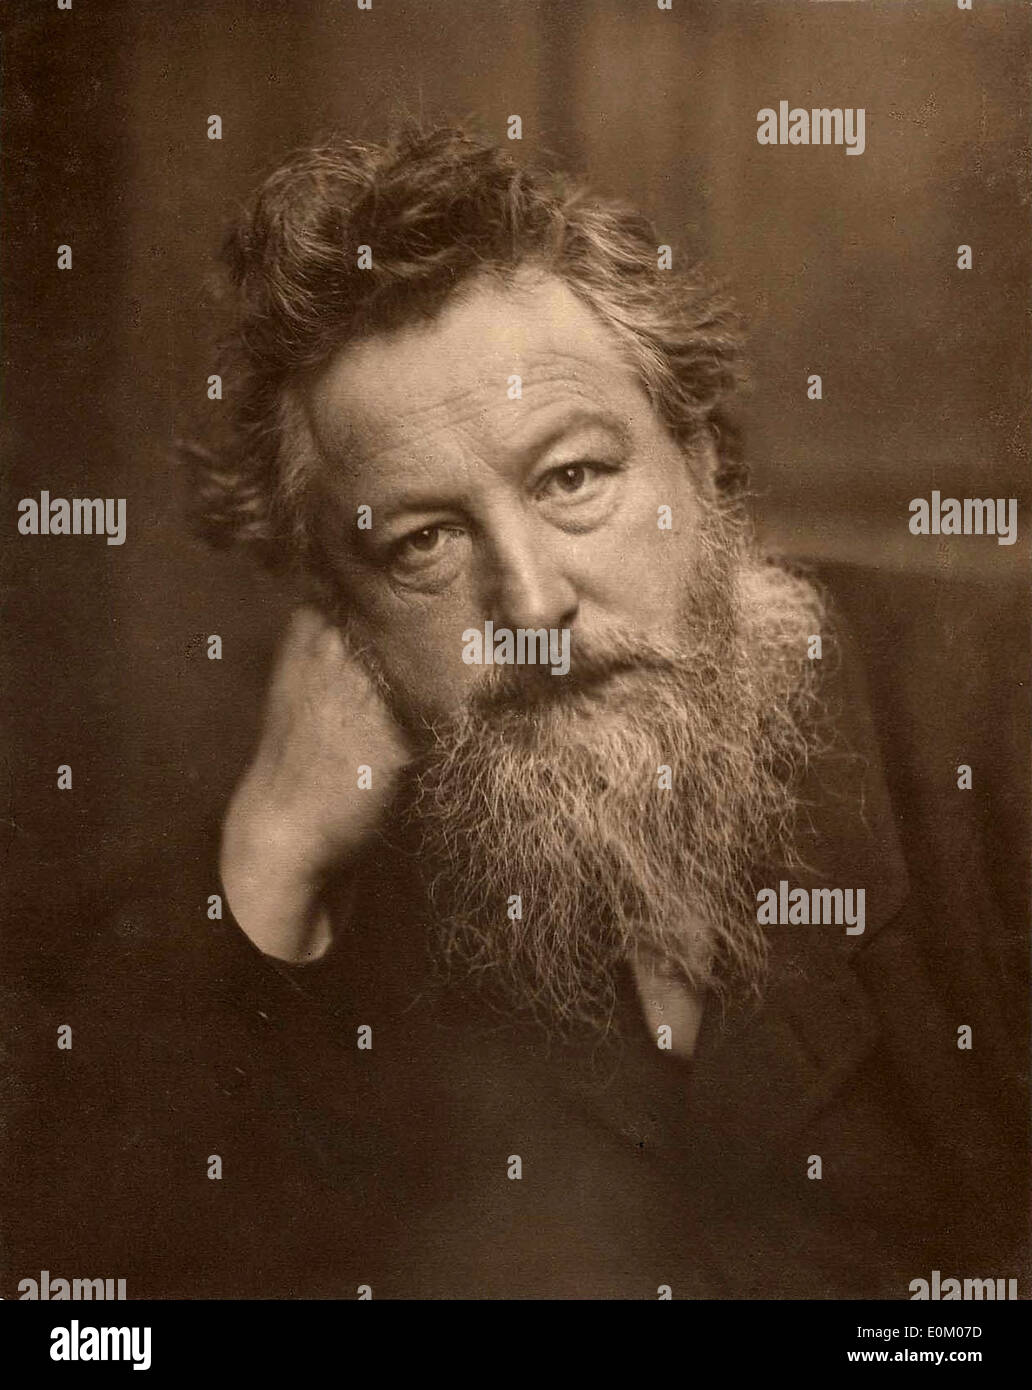 Biography of William Morris, Arts and Crafts Pioneer